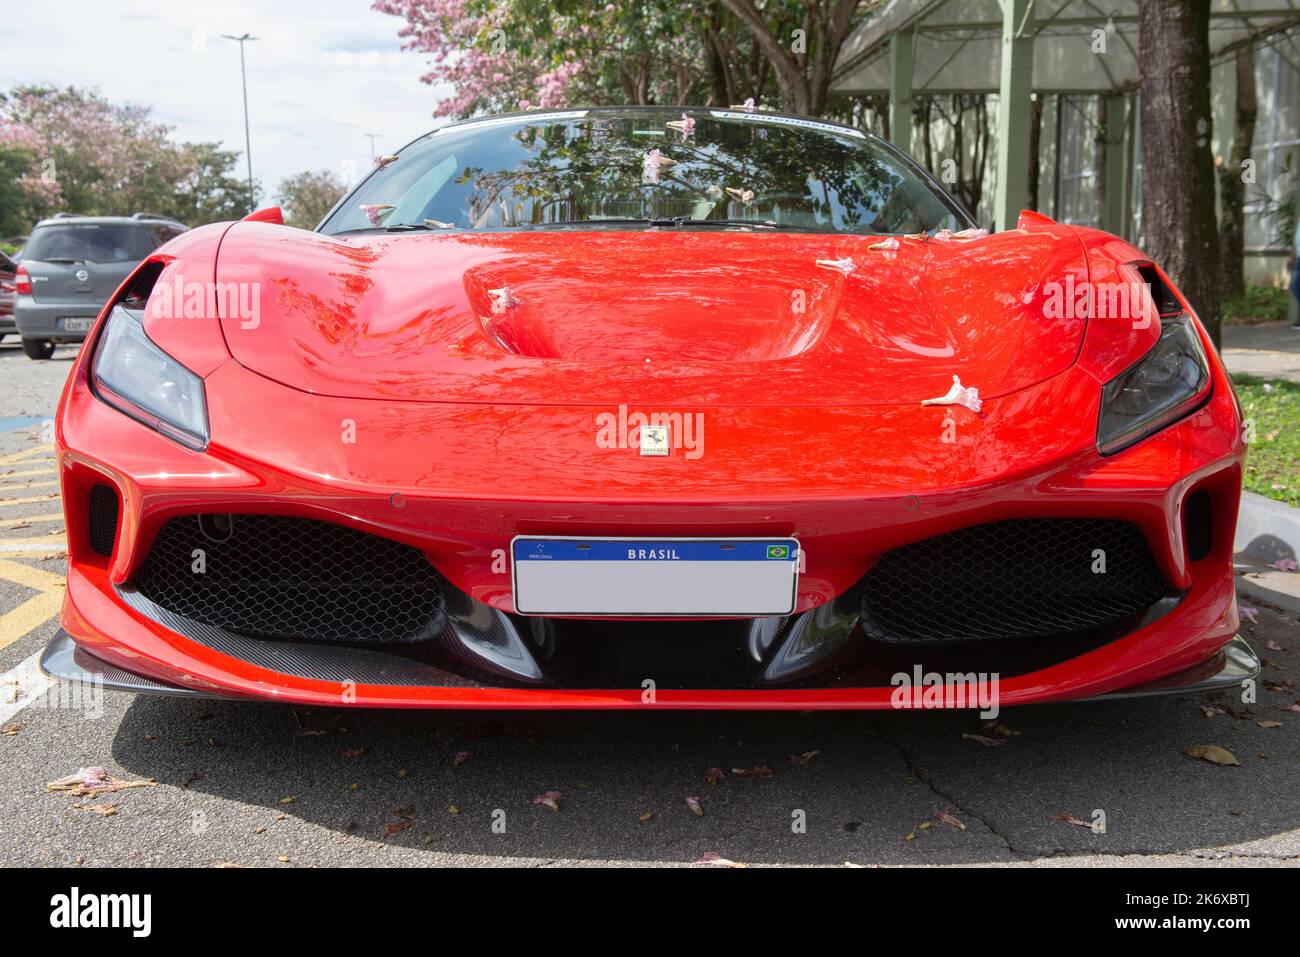 Atibaia - Brazil, October 7, 2022: Low front view of red Ferrari F8 Tributo parked. Mid-engined rear drive sports car. Ferrari is an Italian luxury sp Stock Photo